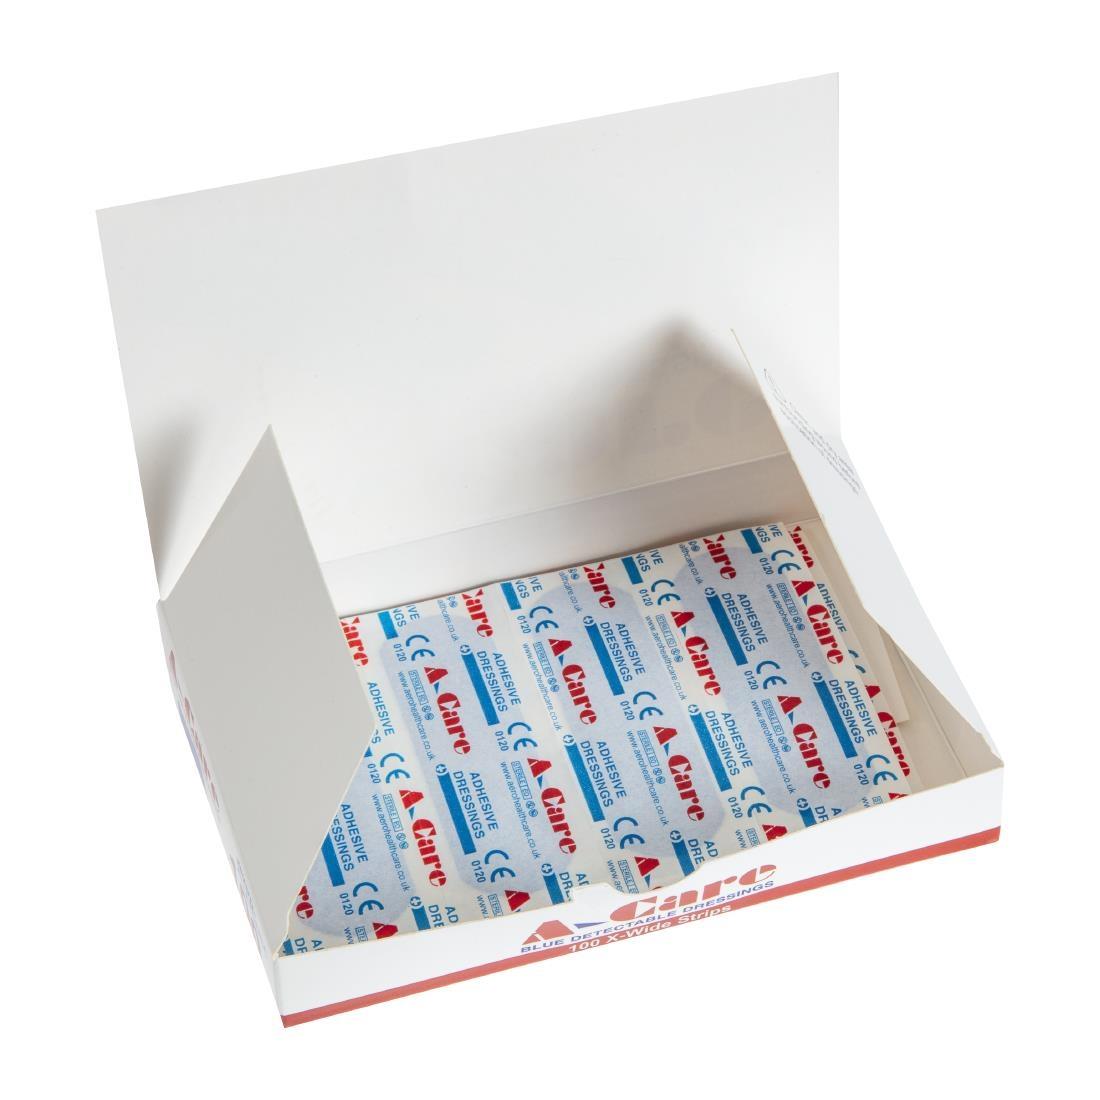 A-CARE DETECTABLE BLUE PLASTERS EXTRA WIDE STRIP 75X25MM - BOX 100 - CB442  - 3